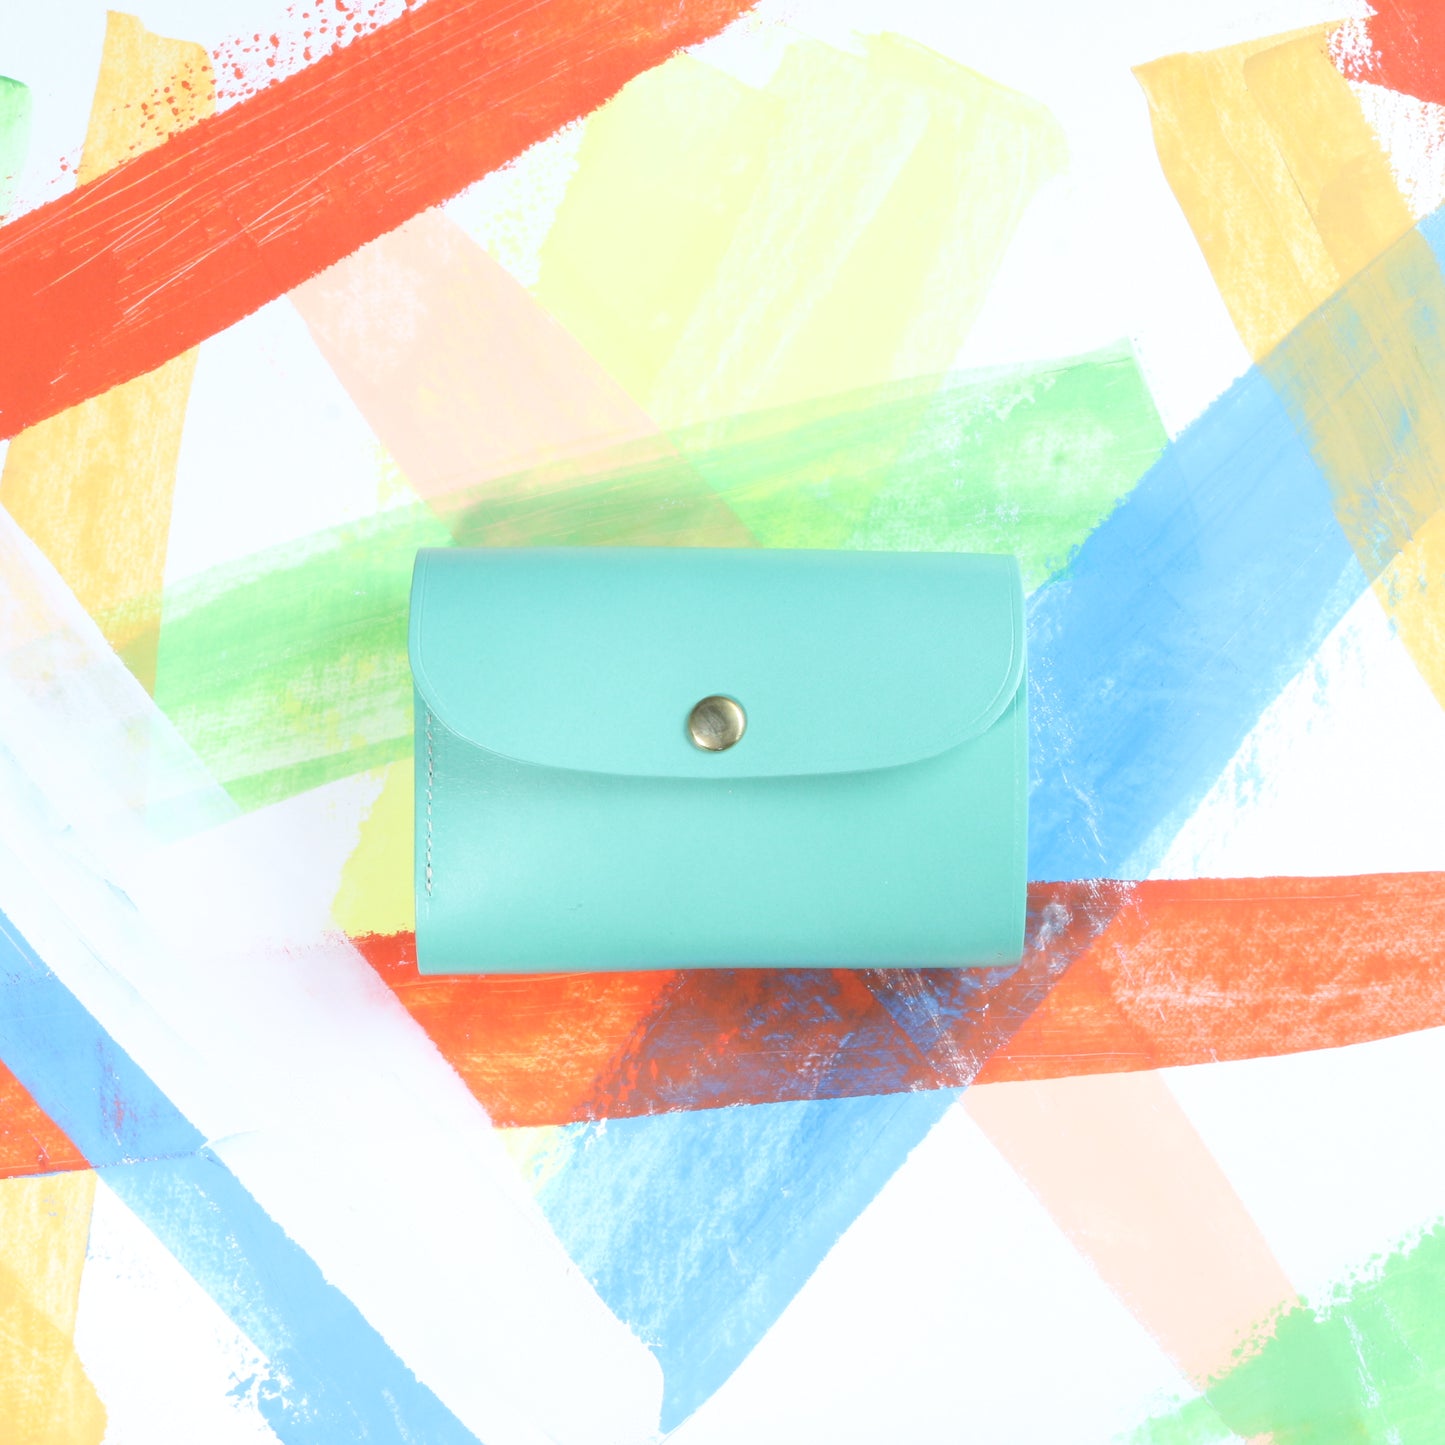 [Limited pastel leather] - comet R2 - Compact tri-fold wallet